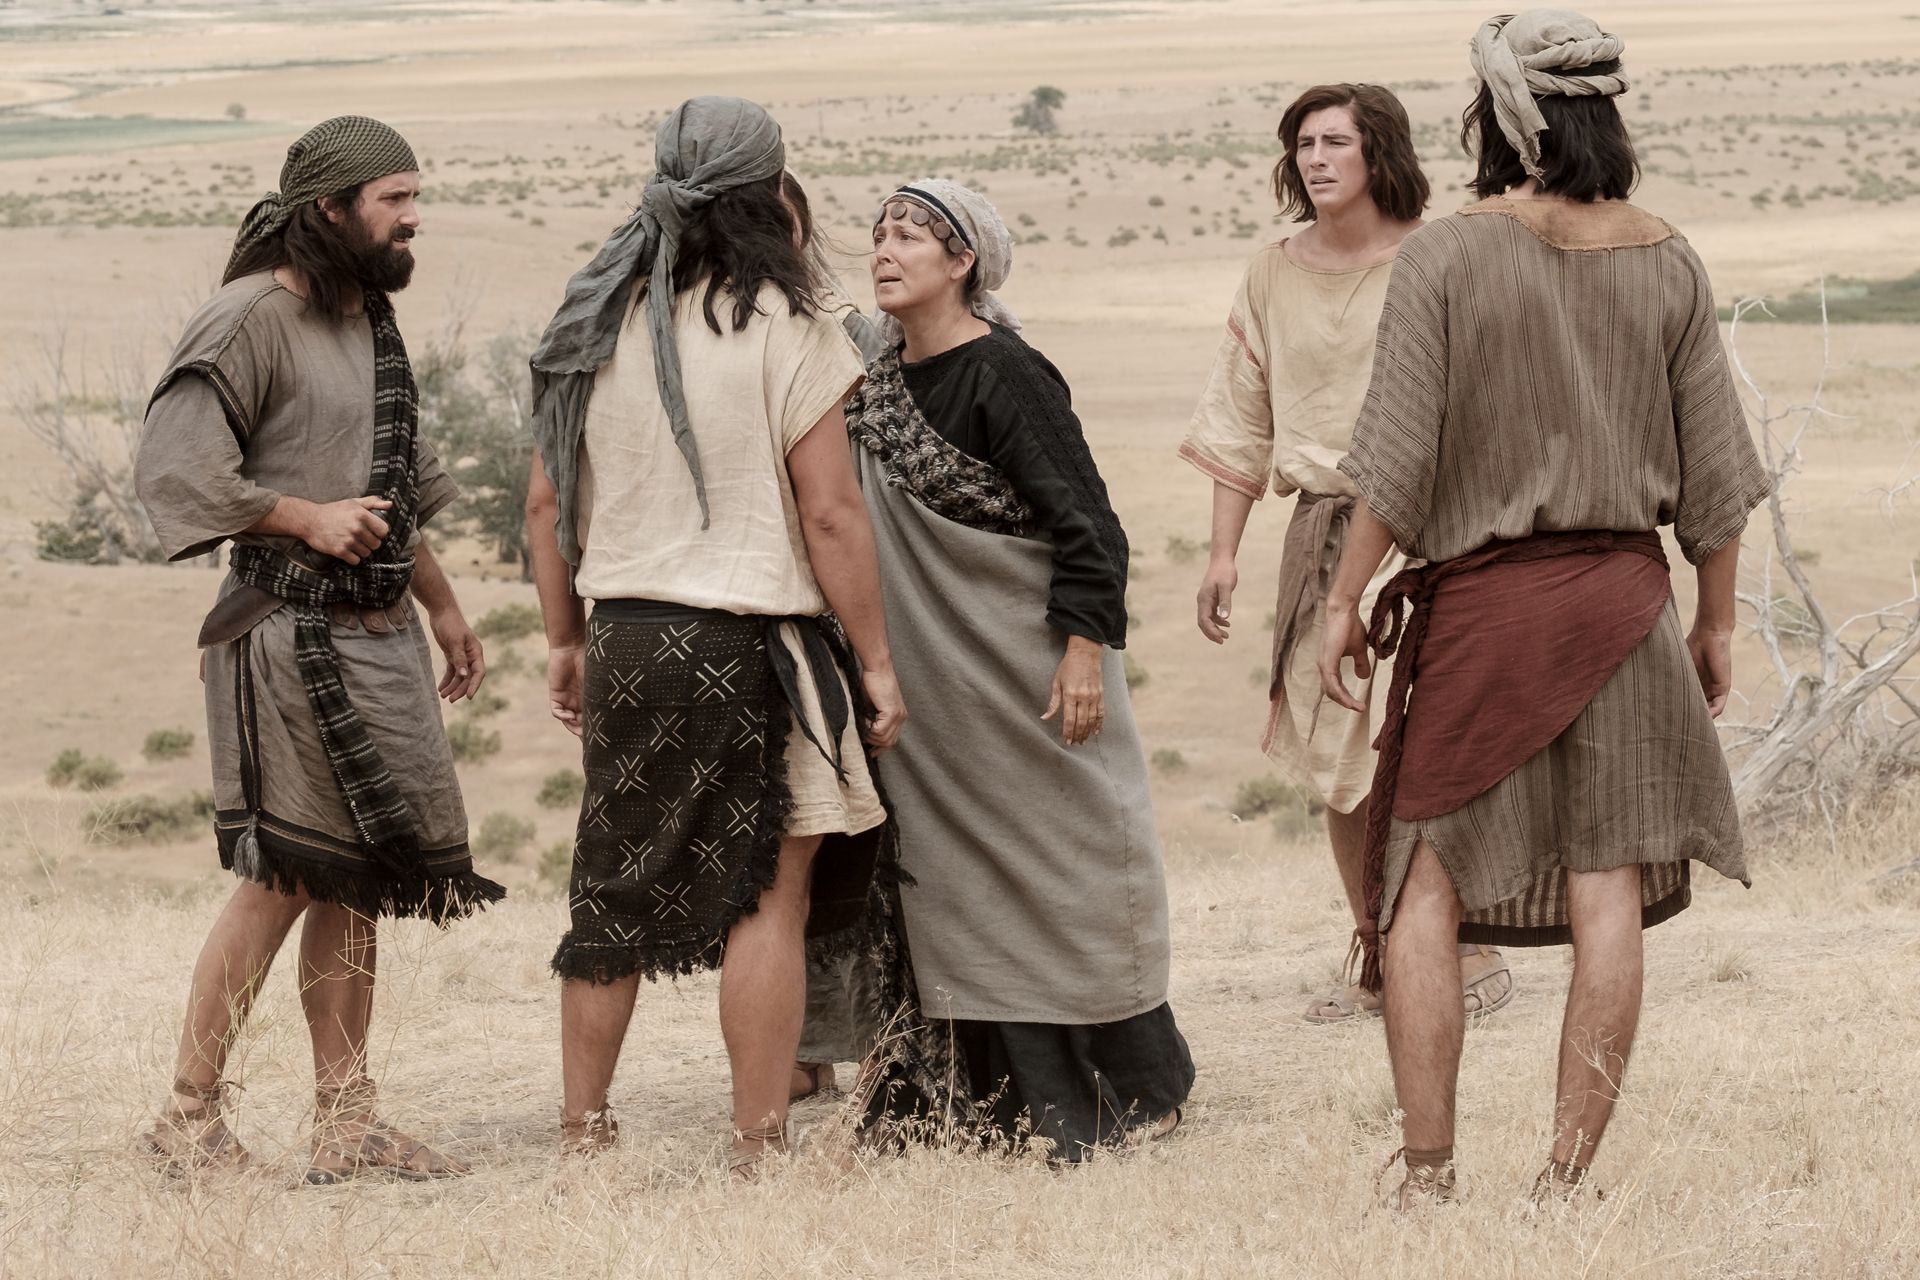 Ishmael's wife confronts Laman and Lemuel after Nephi's bonds were loosed.